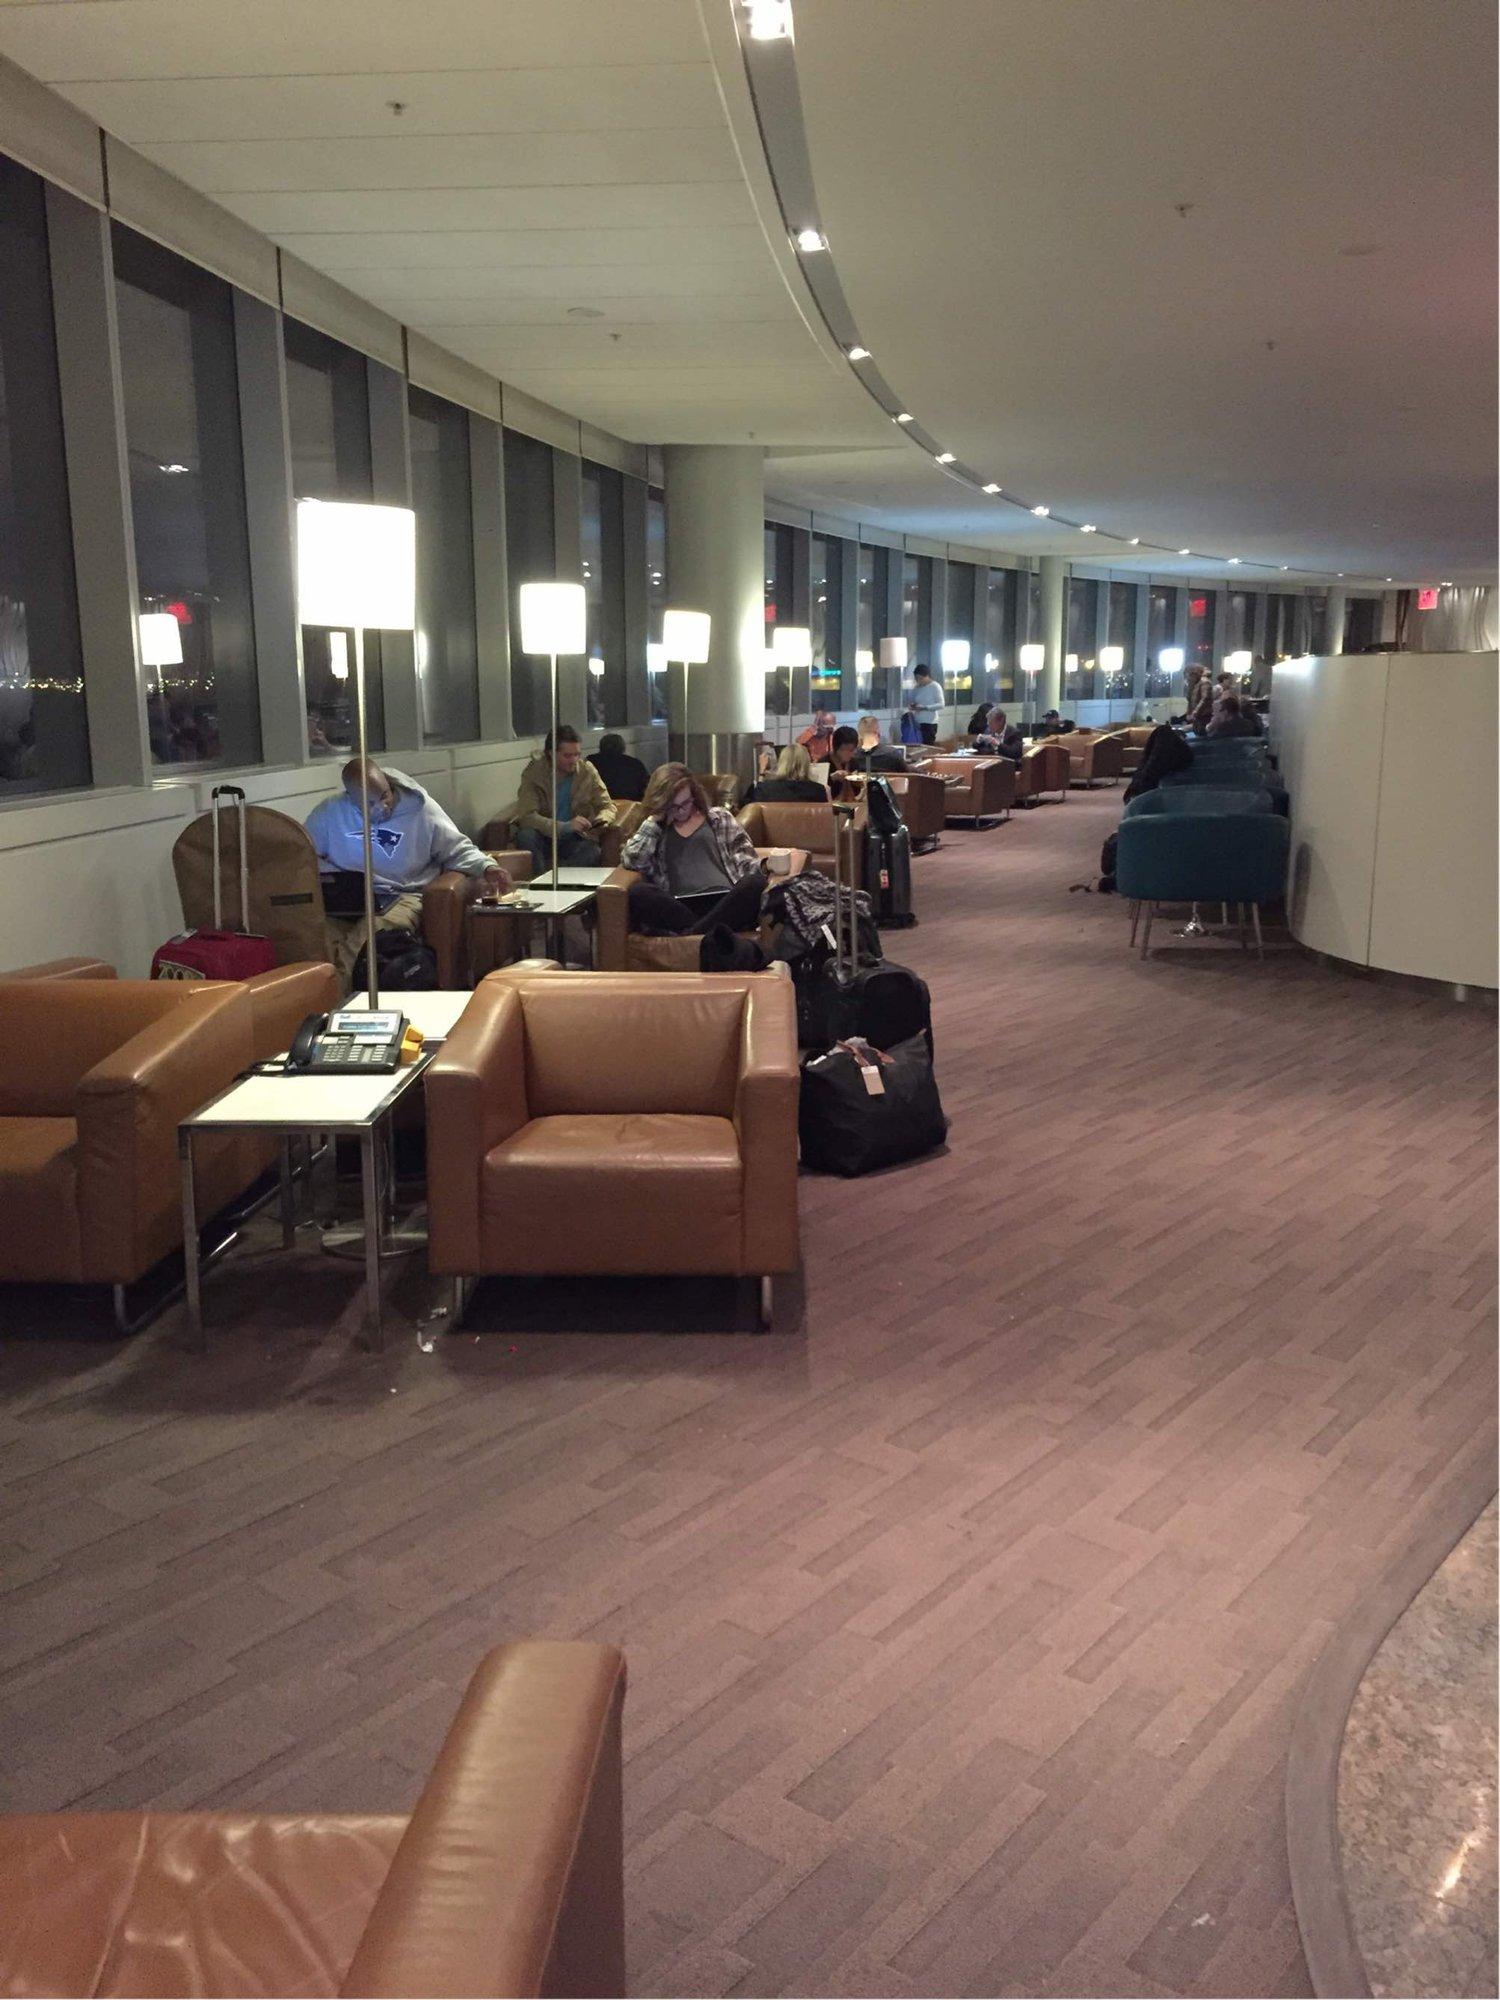 Air Canada Maple Leaf Lounge image 8 of 30